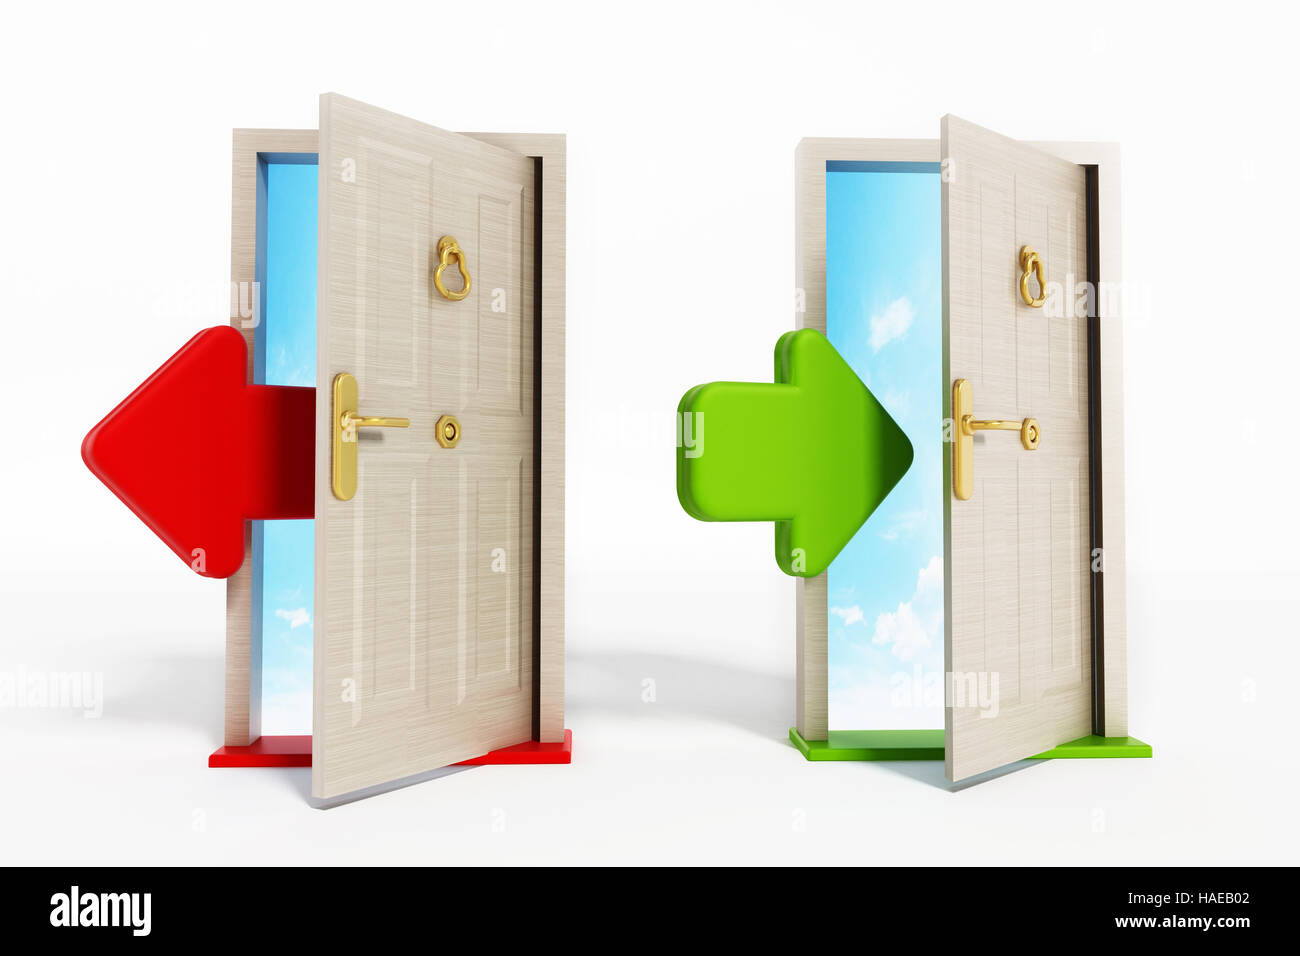 Arrows entering and exiting the doors. 3D illustration. Stock Photo